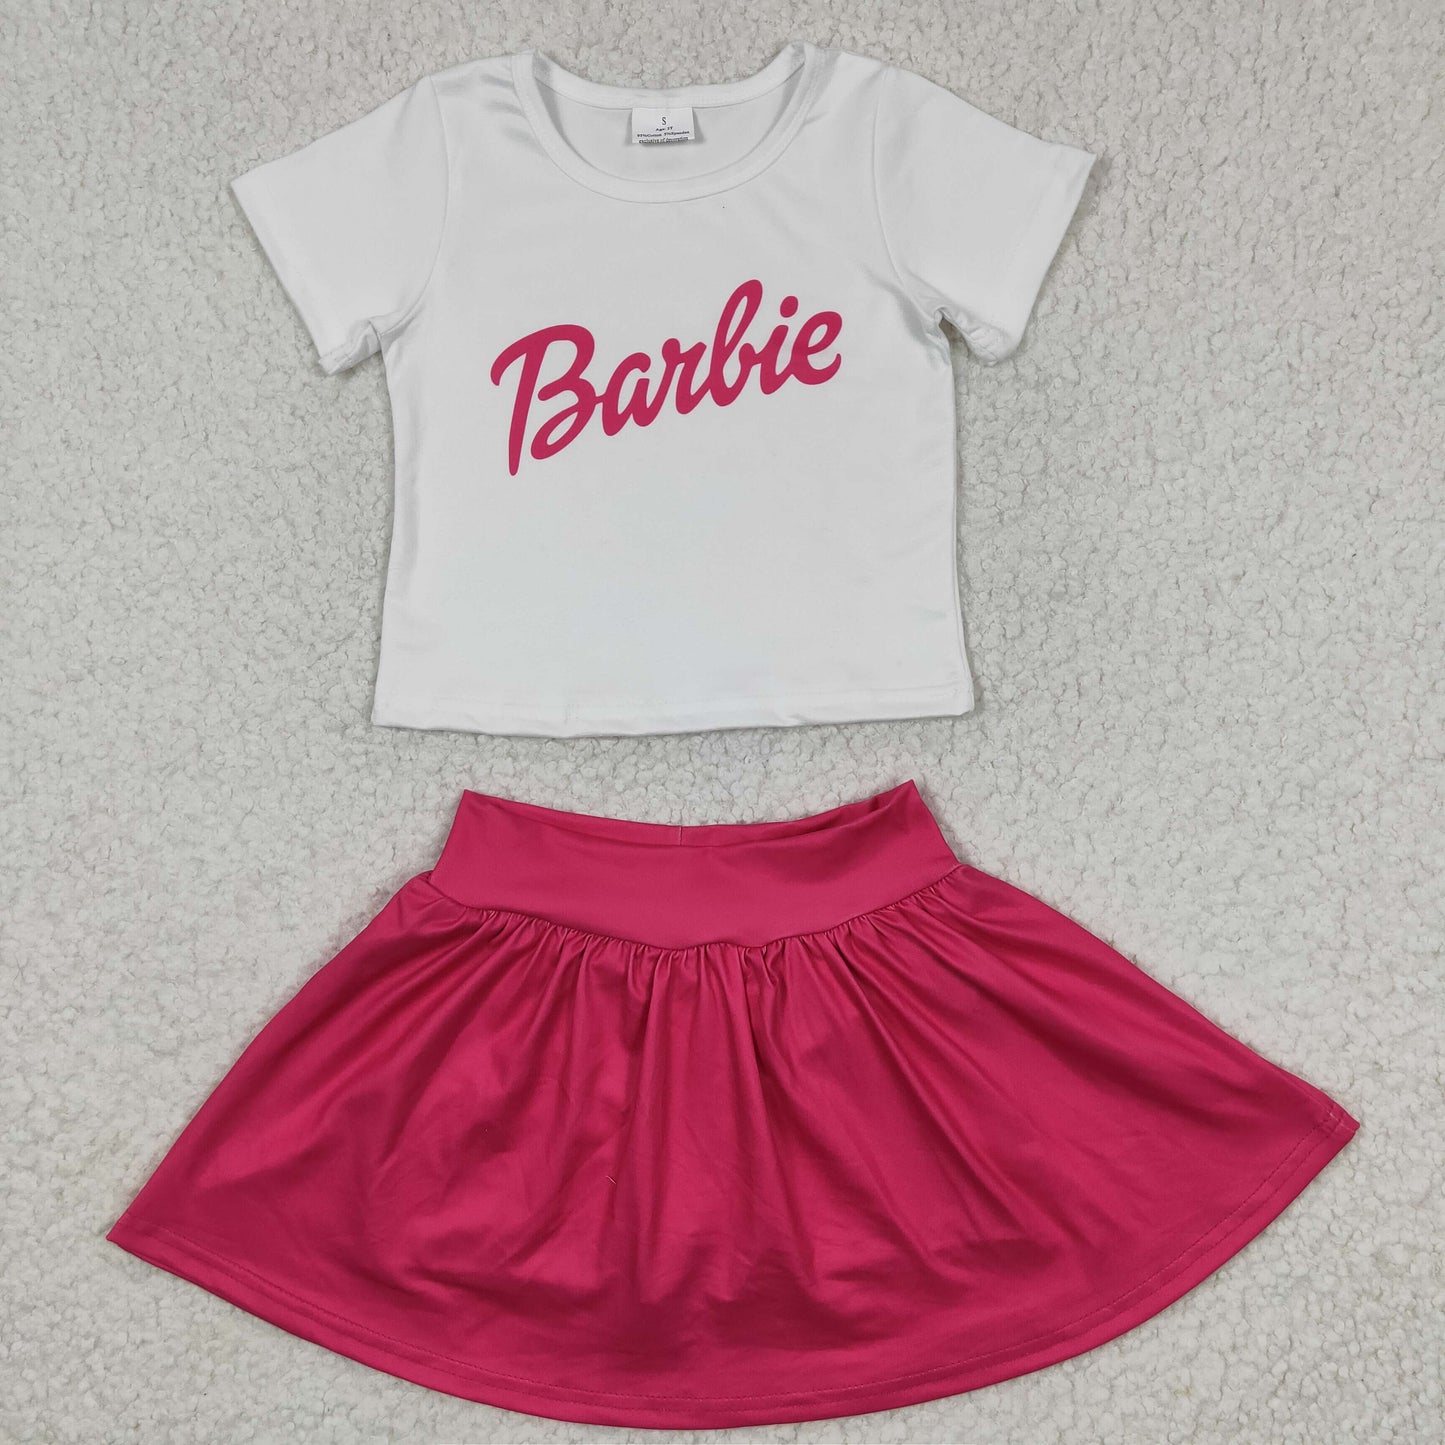 Letter print doll crop top hot pink skirt outfit, GSD0280